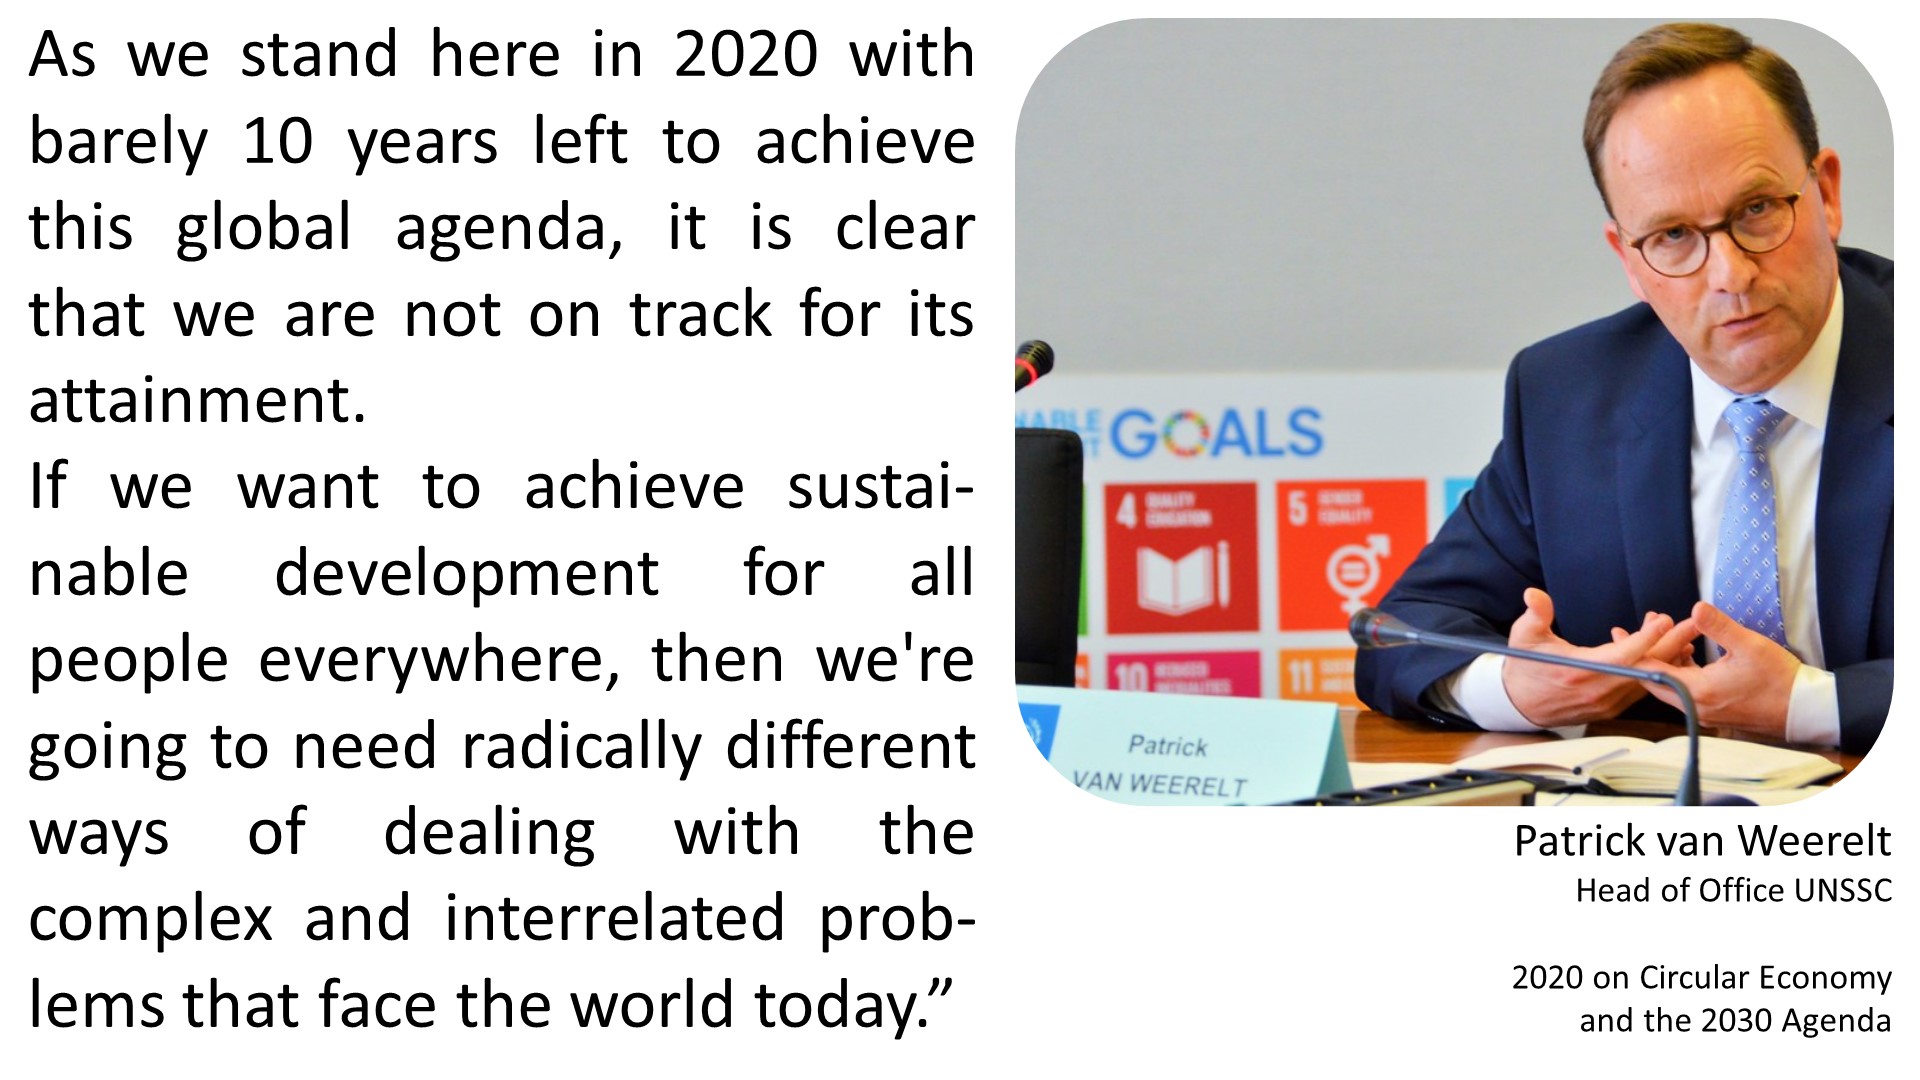 As we stand here in 2020 with barely 10 years left to achieve this global agenda, it is clear that we are not on track for its attainment.